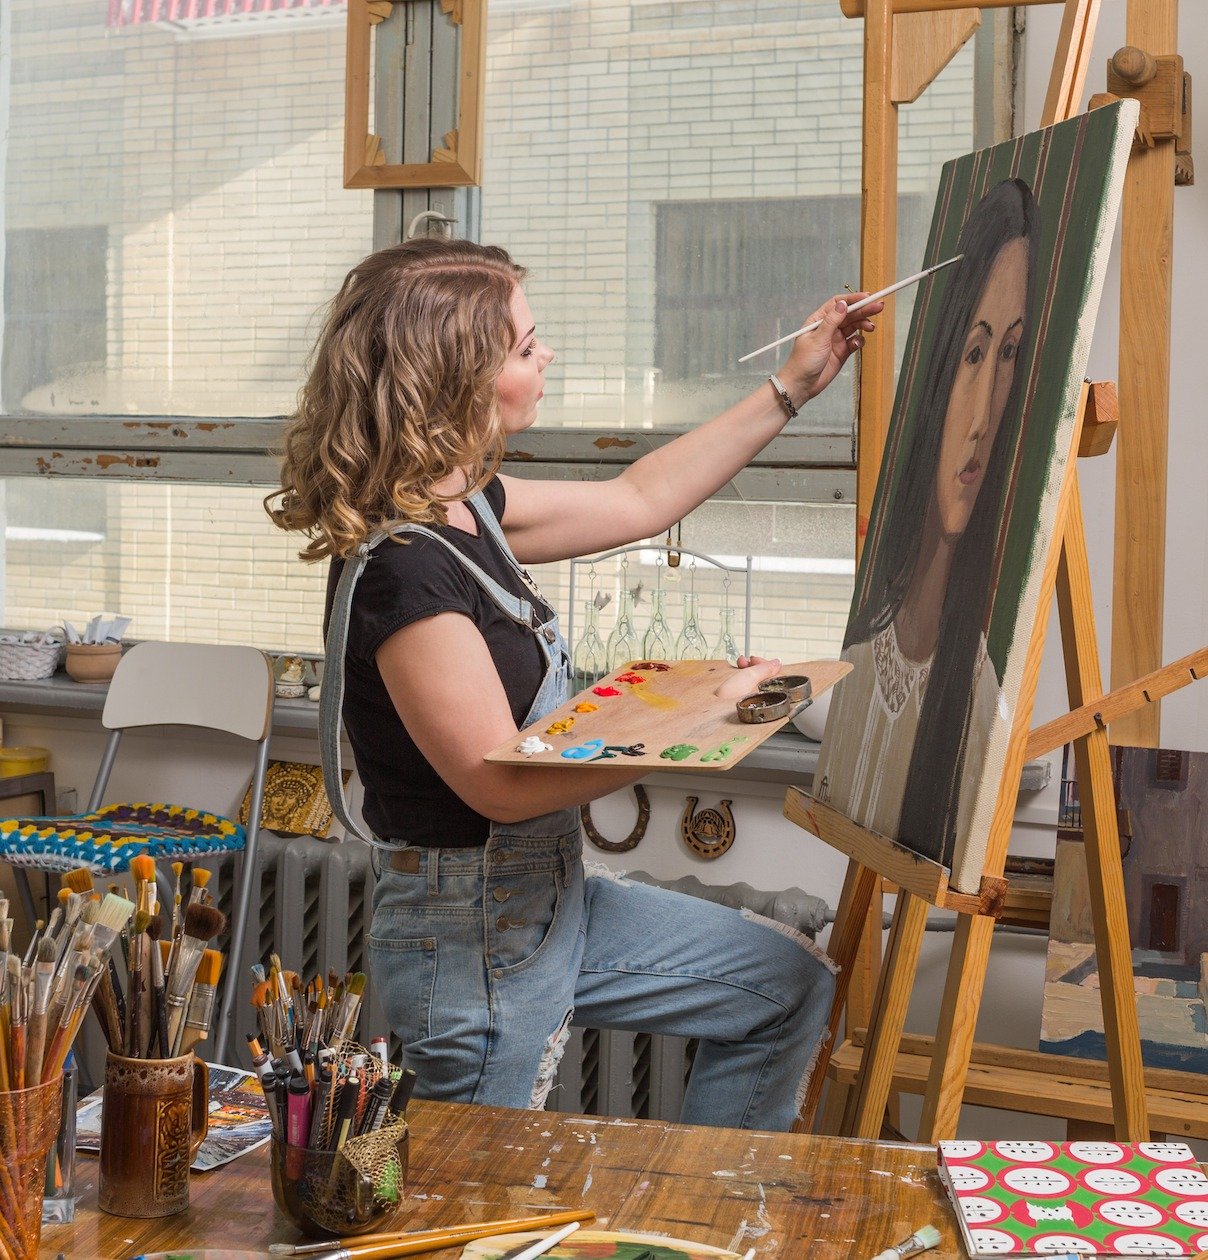 Sunday is always a great day for painting and we have a fantastic class for you to try. 
The Portraiture Masterclass this Sunday 12 May is an ideal opportunity to work on portraiture with Julia Hawkins RP and a professional model. 10am-4pm
Easels, bo